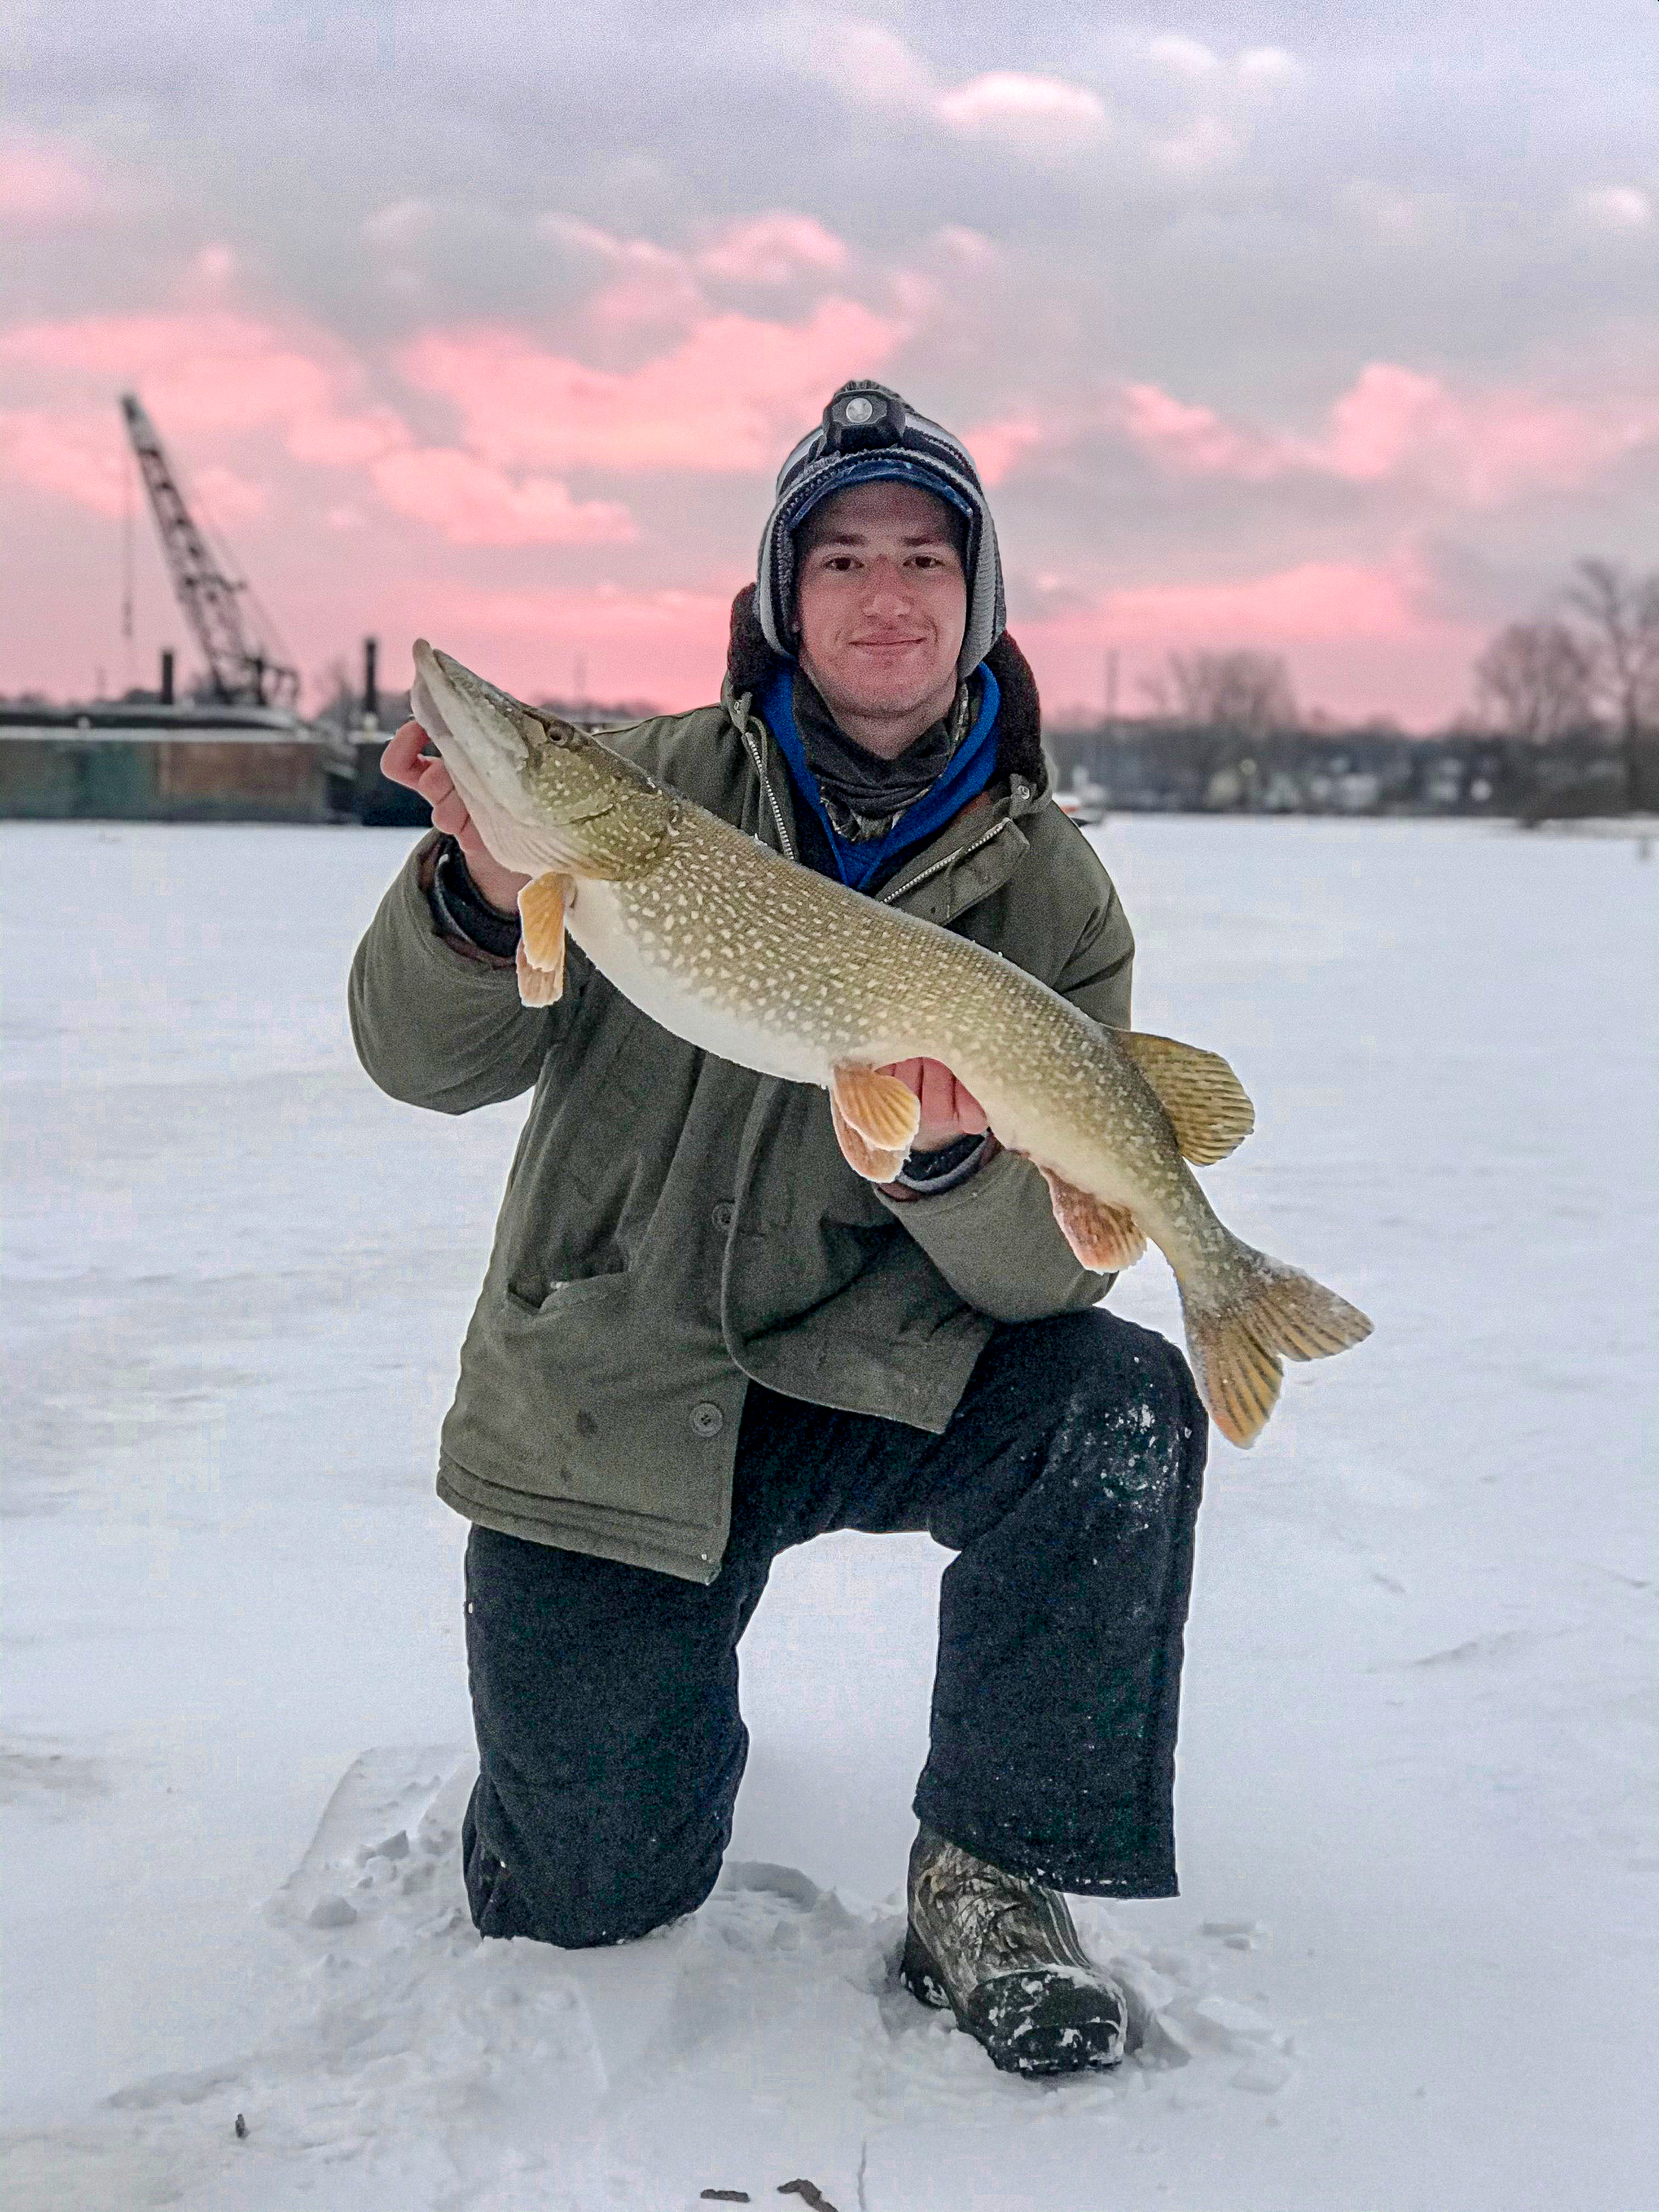 http://res.cloudinary.com/simpleview/image/upload/v1664477172/clients/muskegonmi/IceFishing_1a064594-df39-49e5-b629-703181dca704.jpg